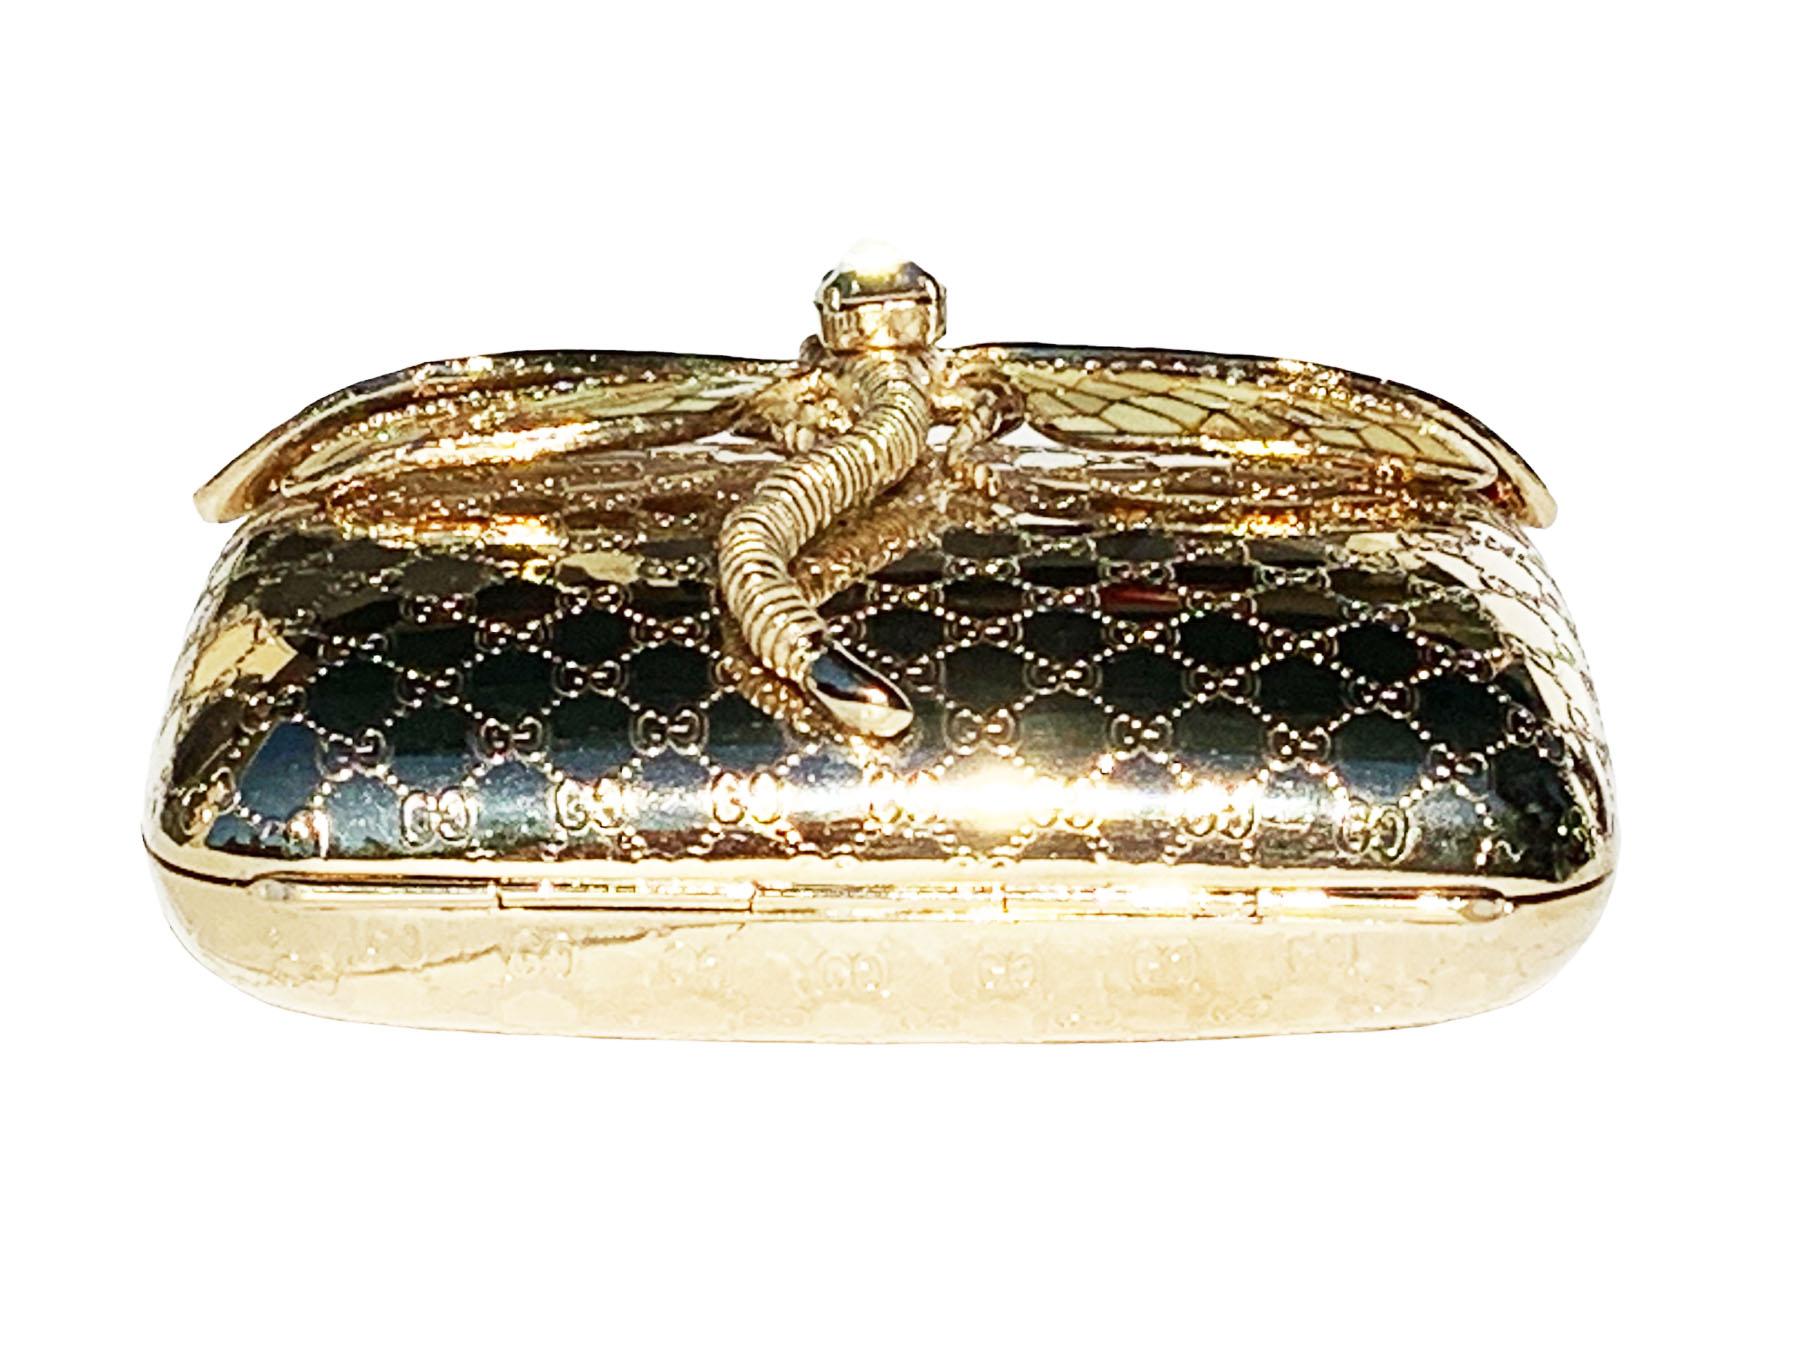 Tom Ford for Gucci Dragonfly Gold Metal MicroGuccissima Enamel Minaudiere Clutch 3